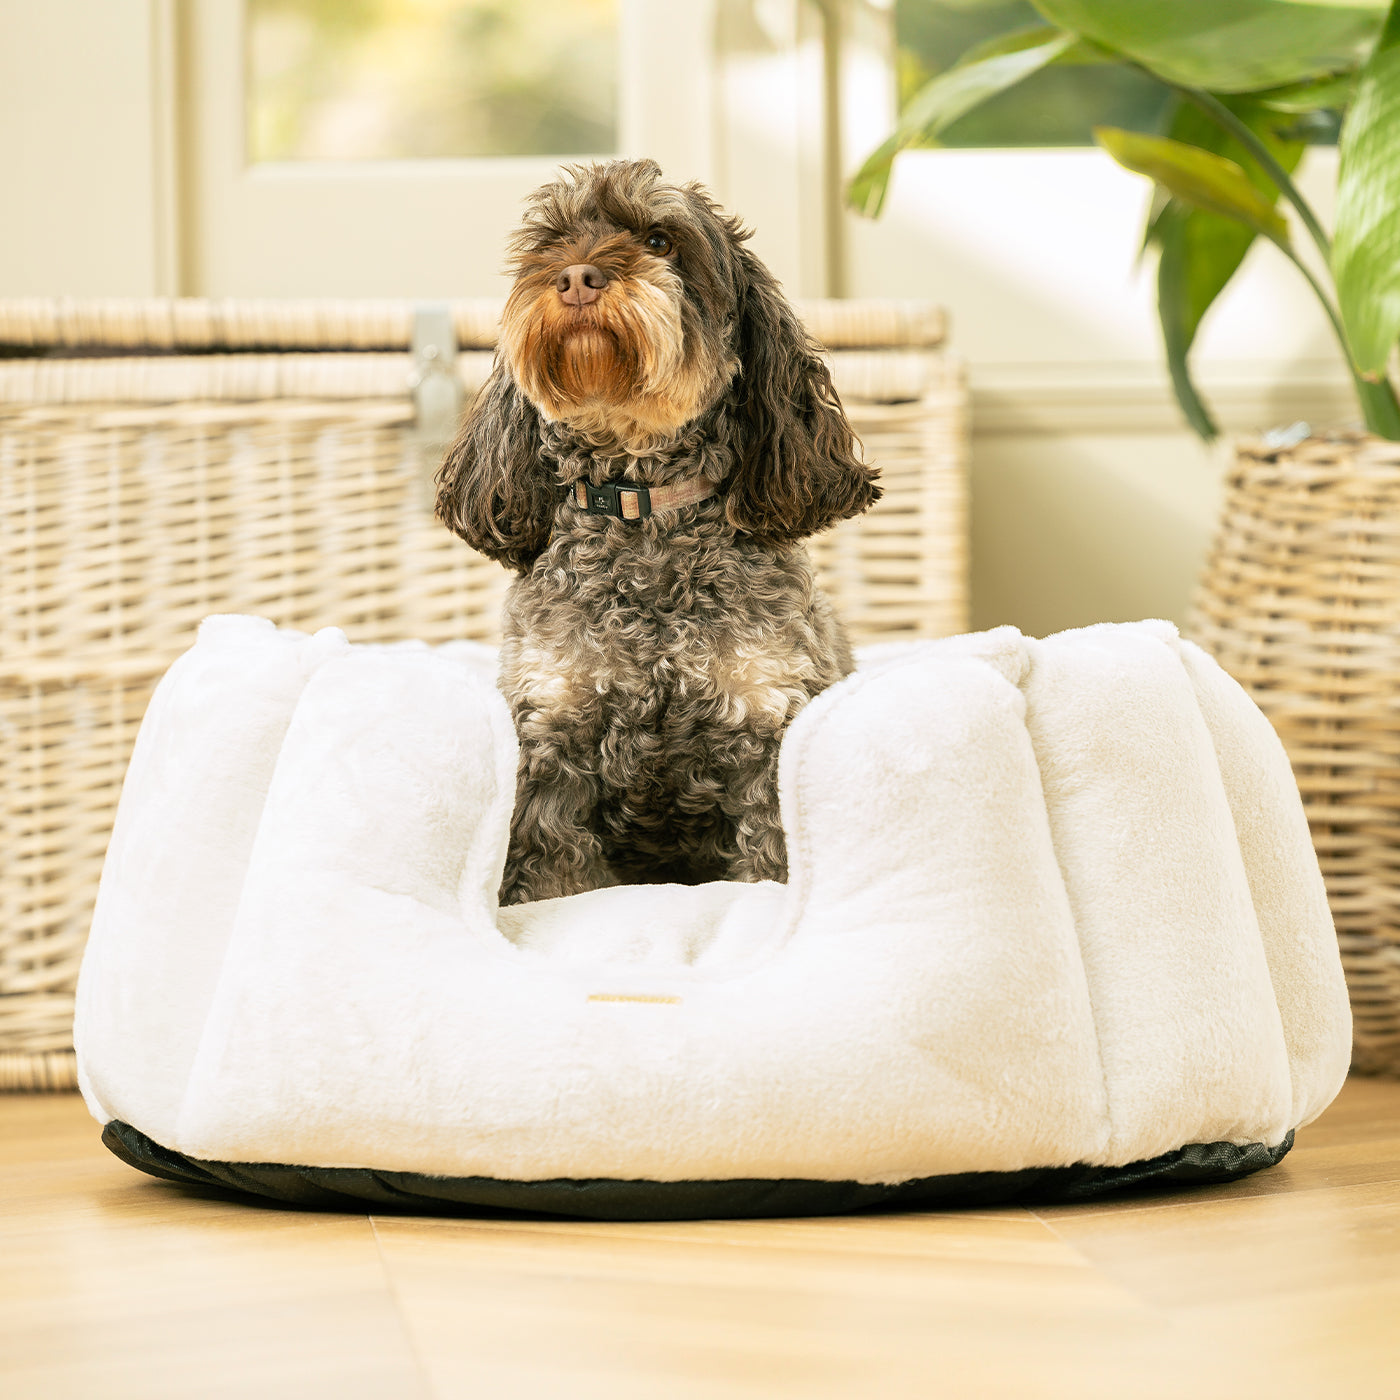 Discover Our Luxurious High Wall Bed For Dogs, Featuring inner pillow with plush teddy fleece on one side To Craft The Perfect Cat Bed In Stunning Anti-Anxiety Cream Faux Fur! Available To Personalize Now at Lords & Labradors US